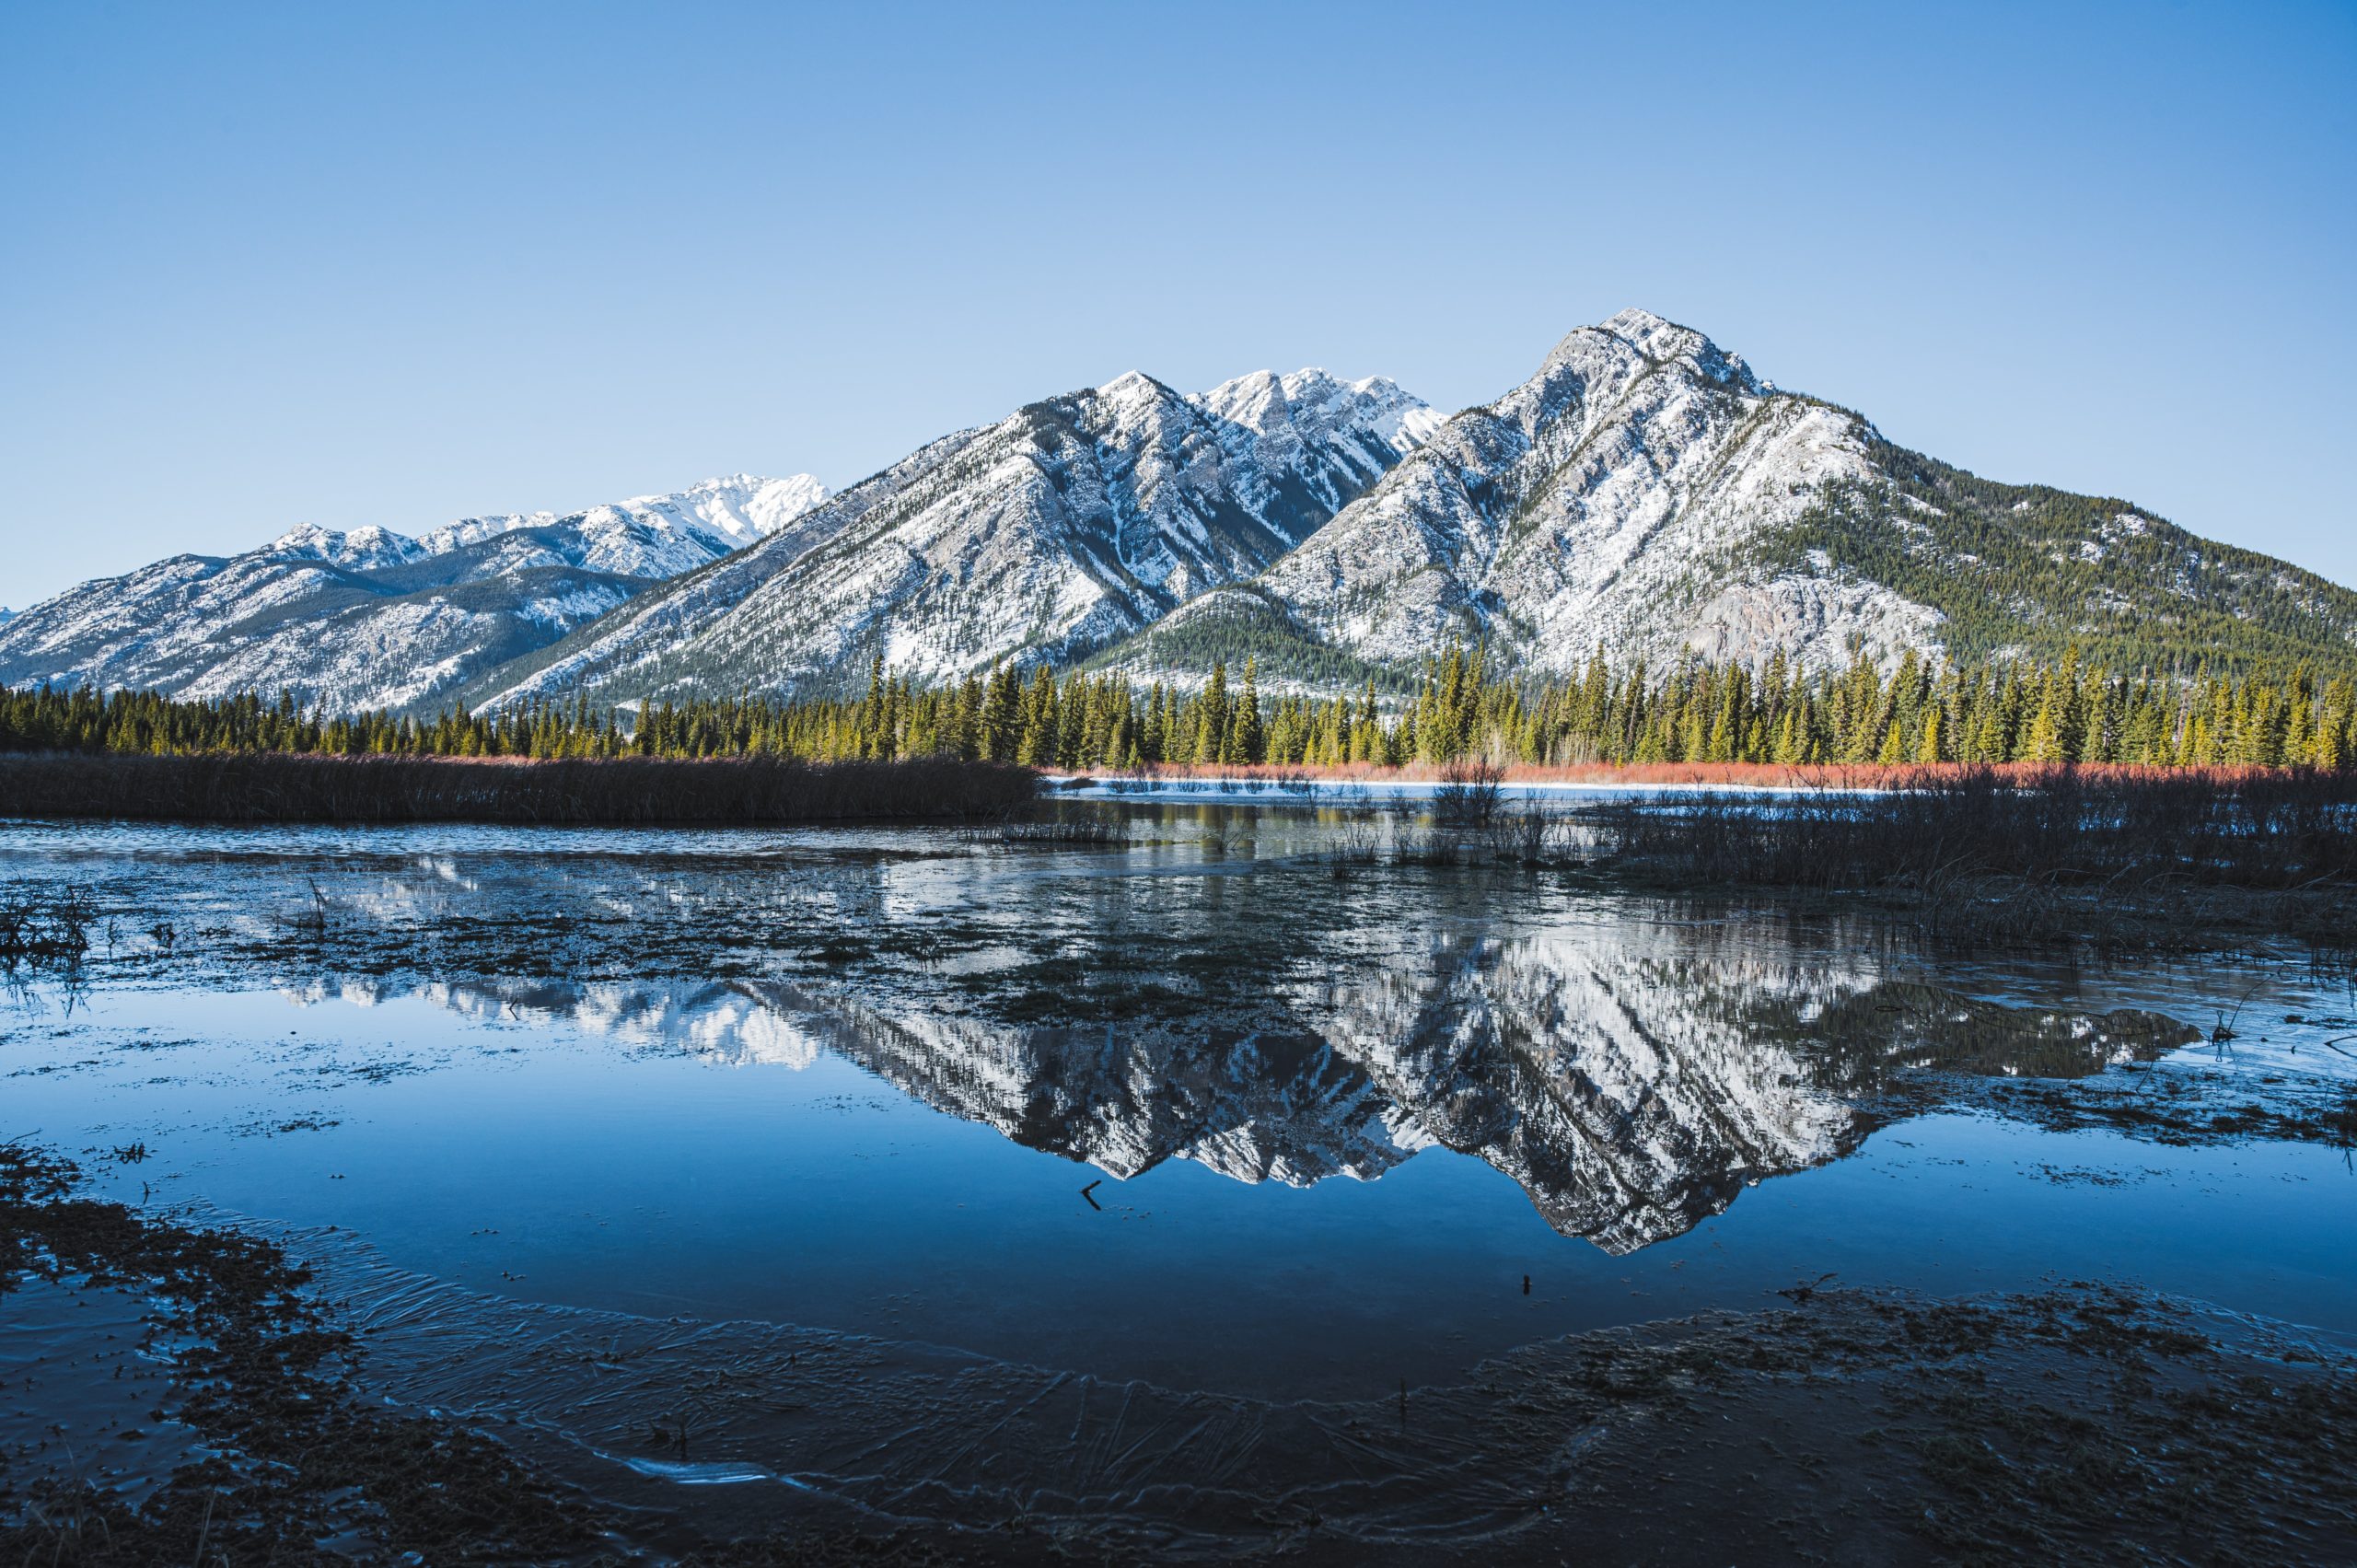 View of lake, mountain reflection, trees on shoreline and snowy mountain